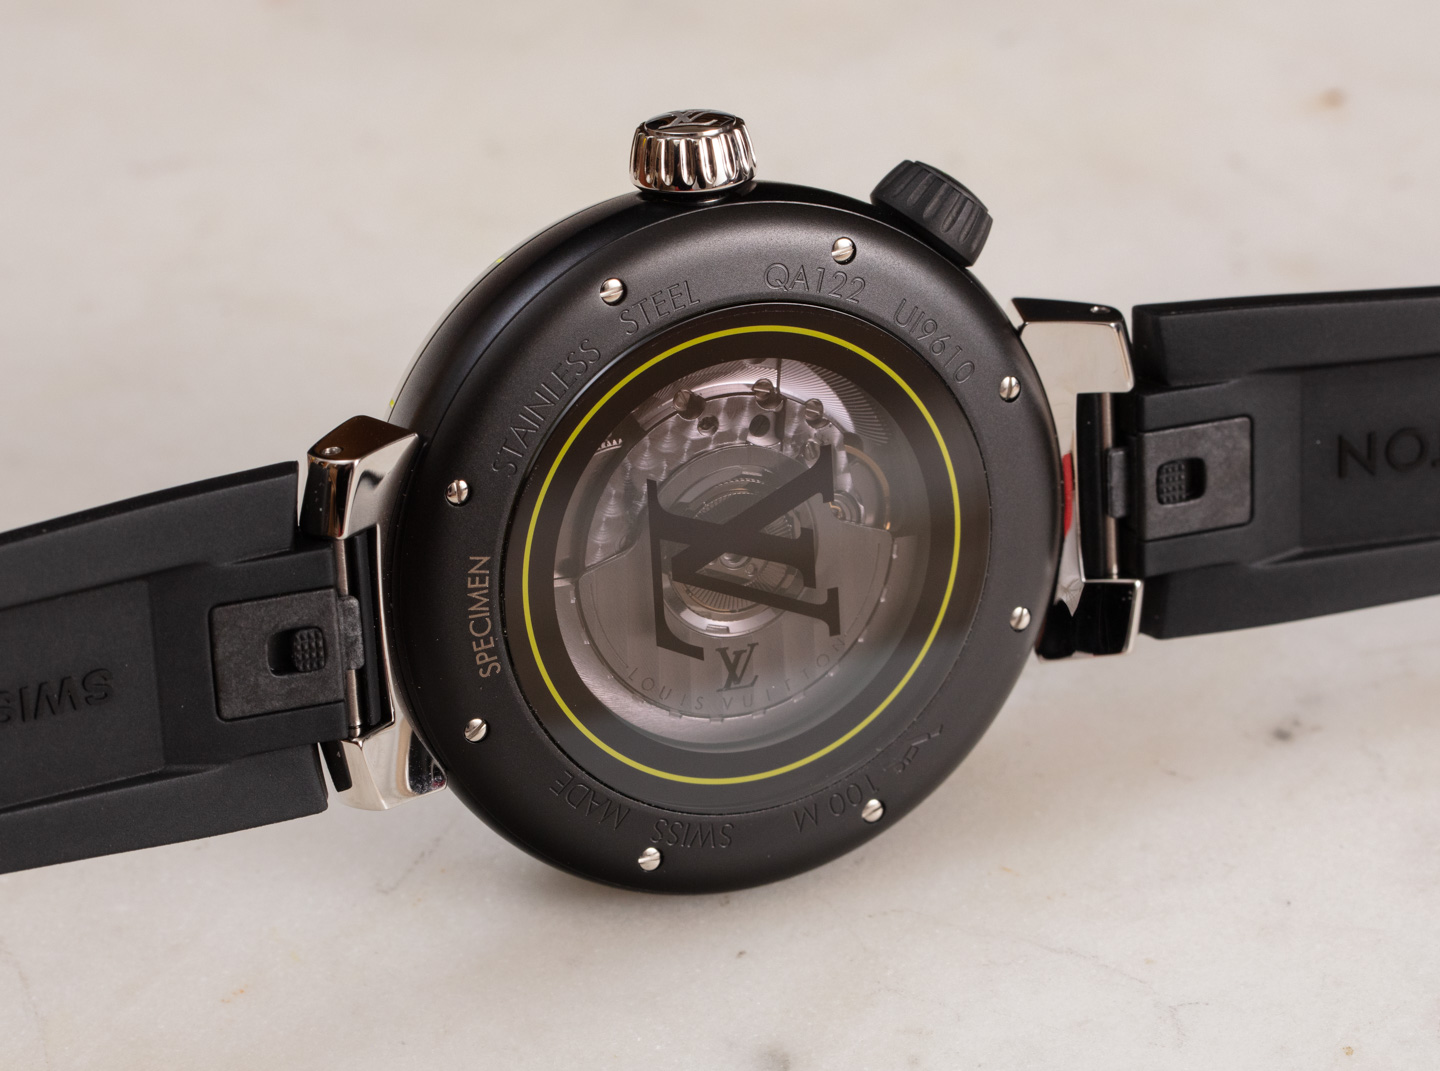 VIDEO: The Louis Vuitton Tambour Street Diver is a fashion-forward diving  watch that oozes urban cool